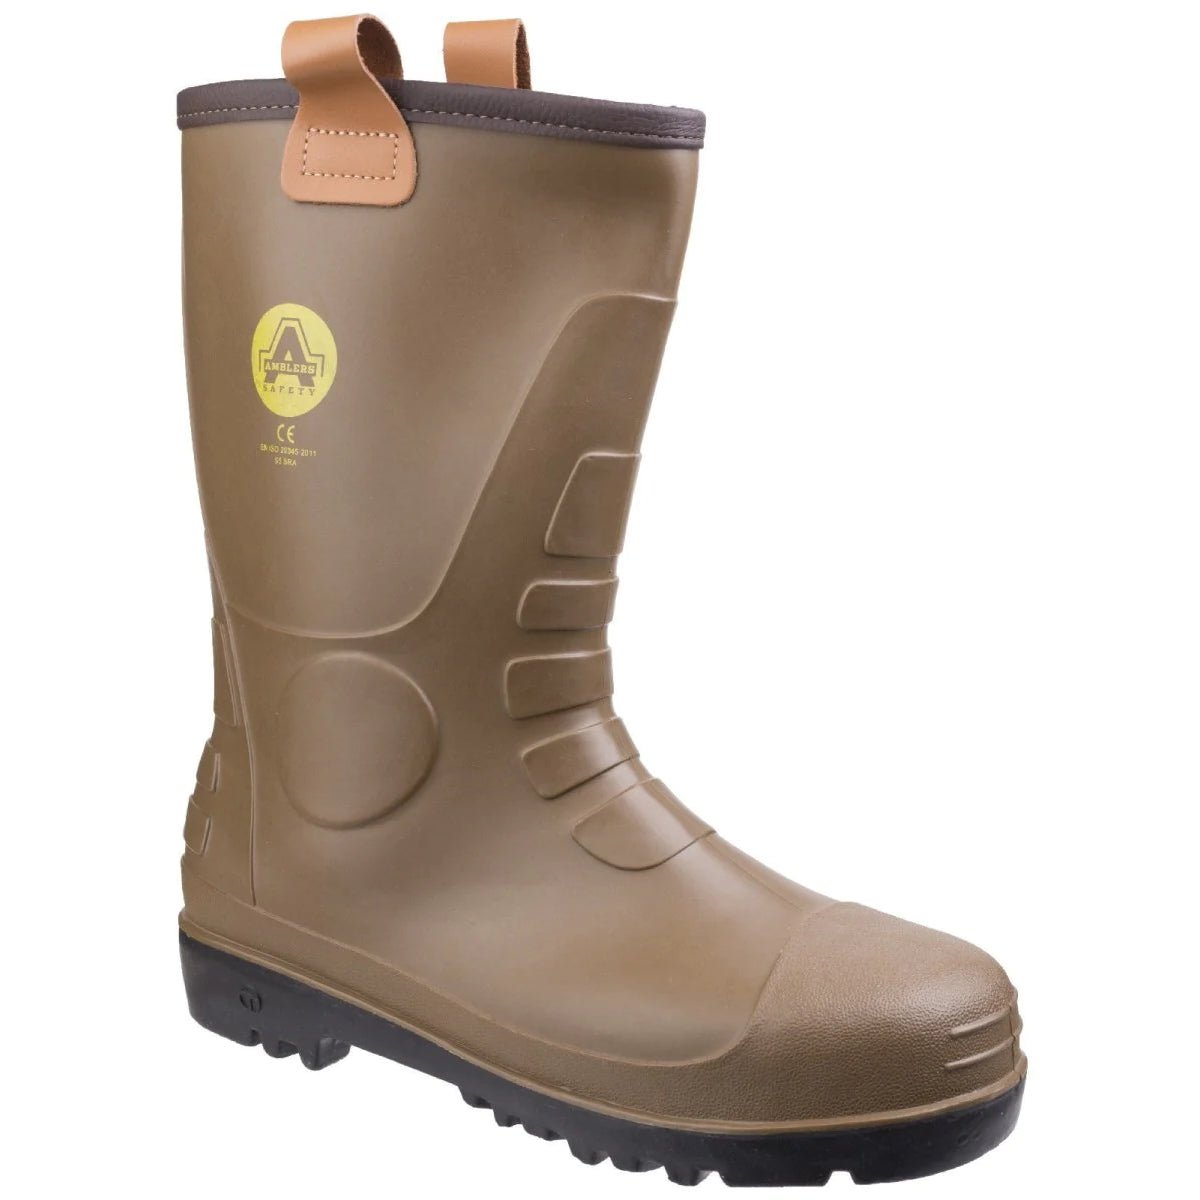 Amblers FS95 Waterproof Steel Toe Cap Safety Rigger Boots - Shoe Store Direct